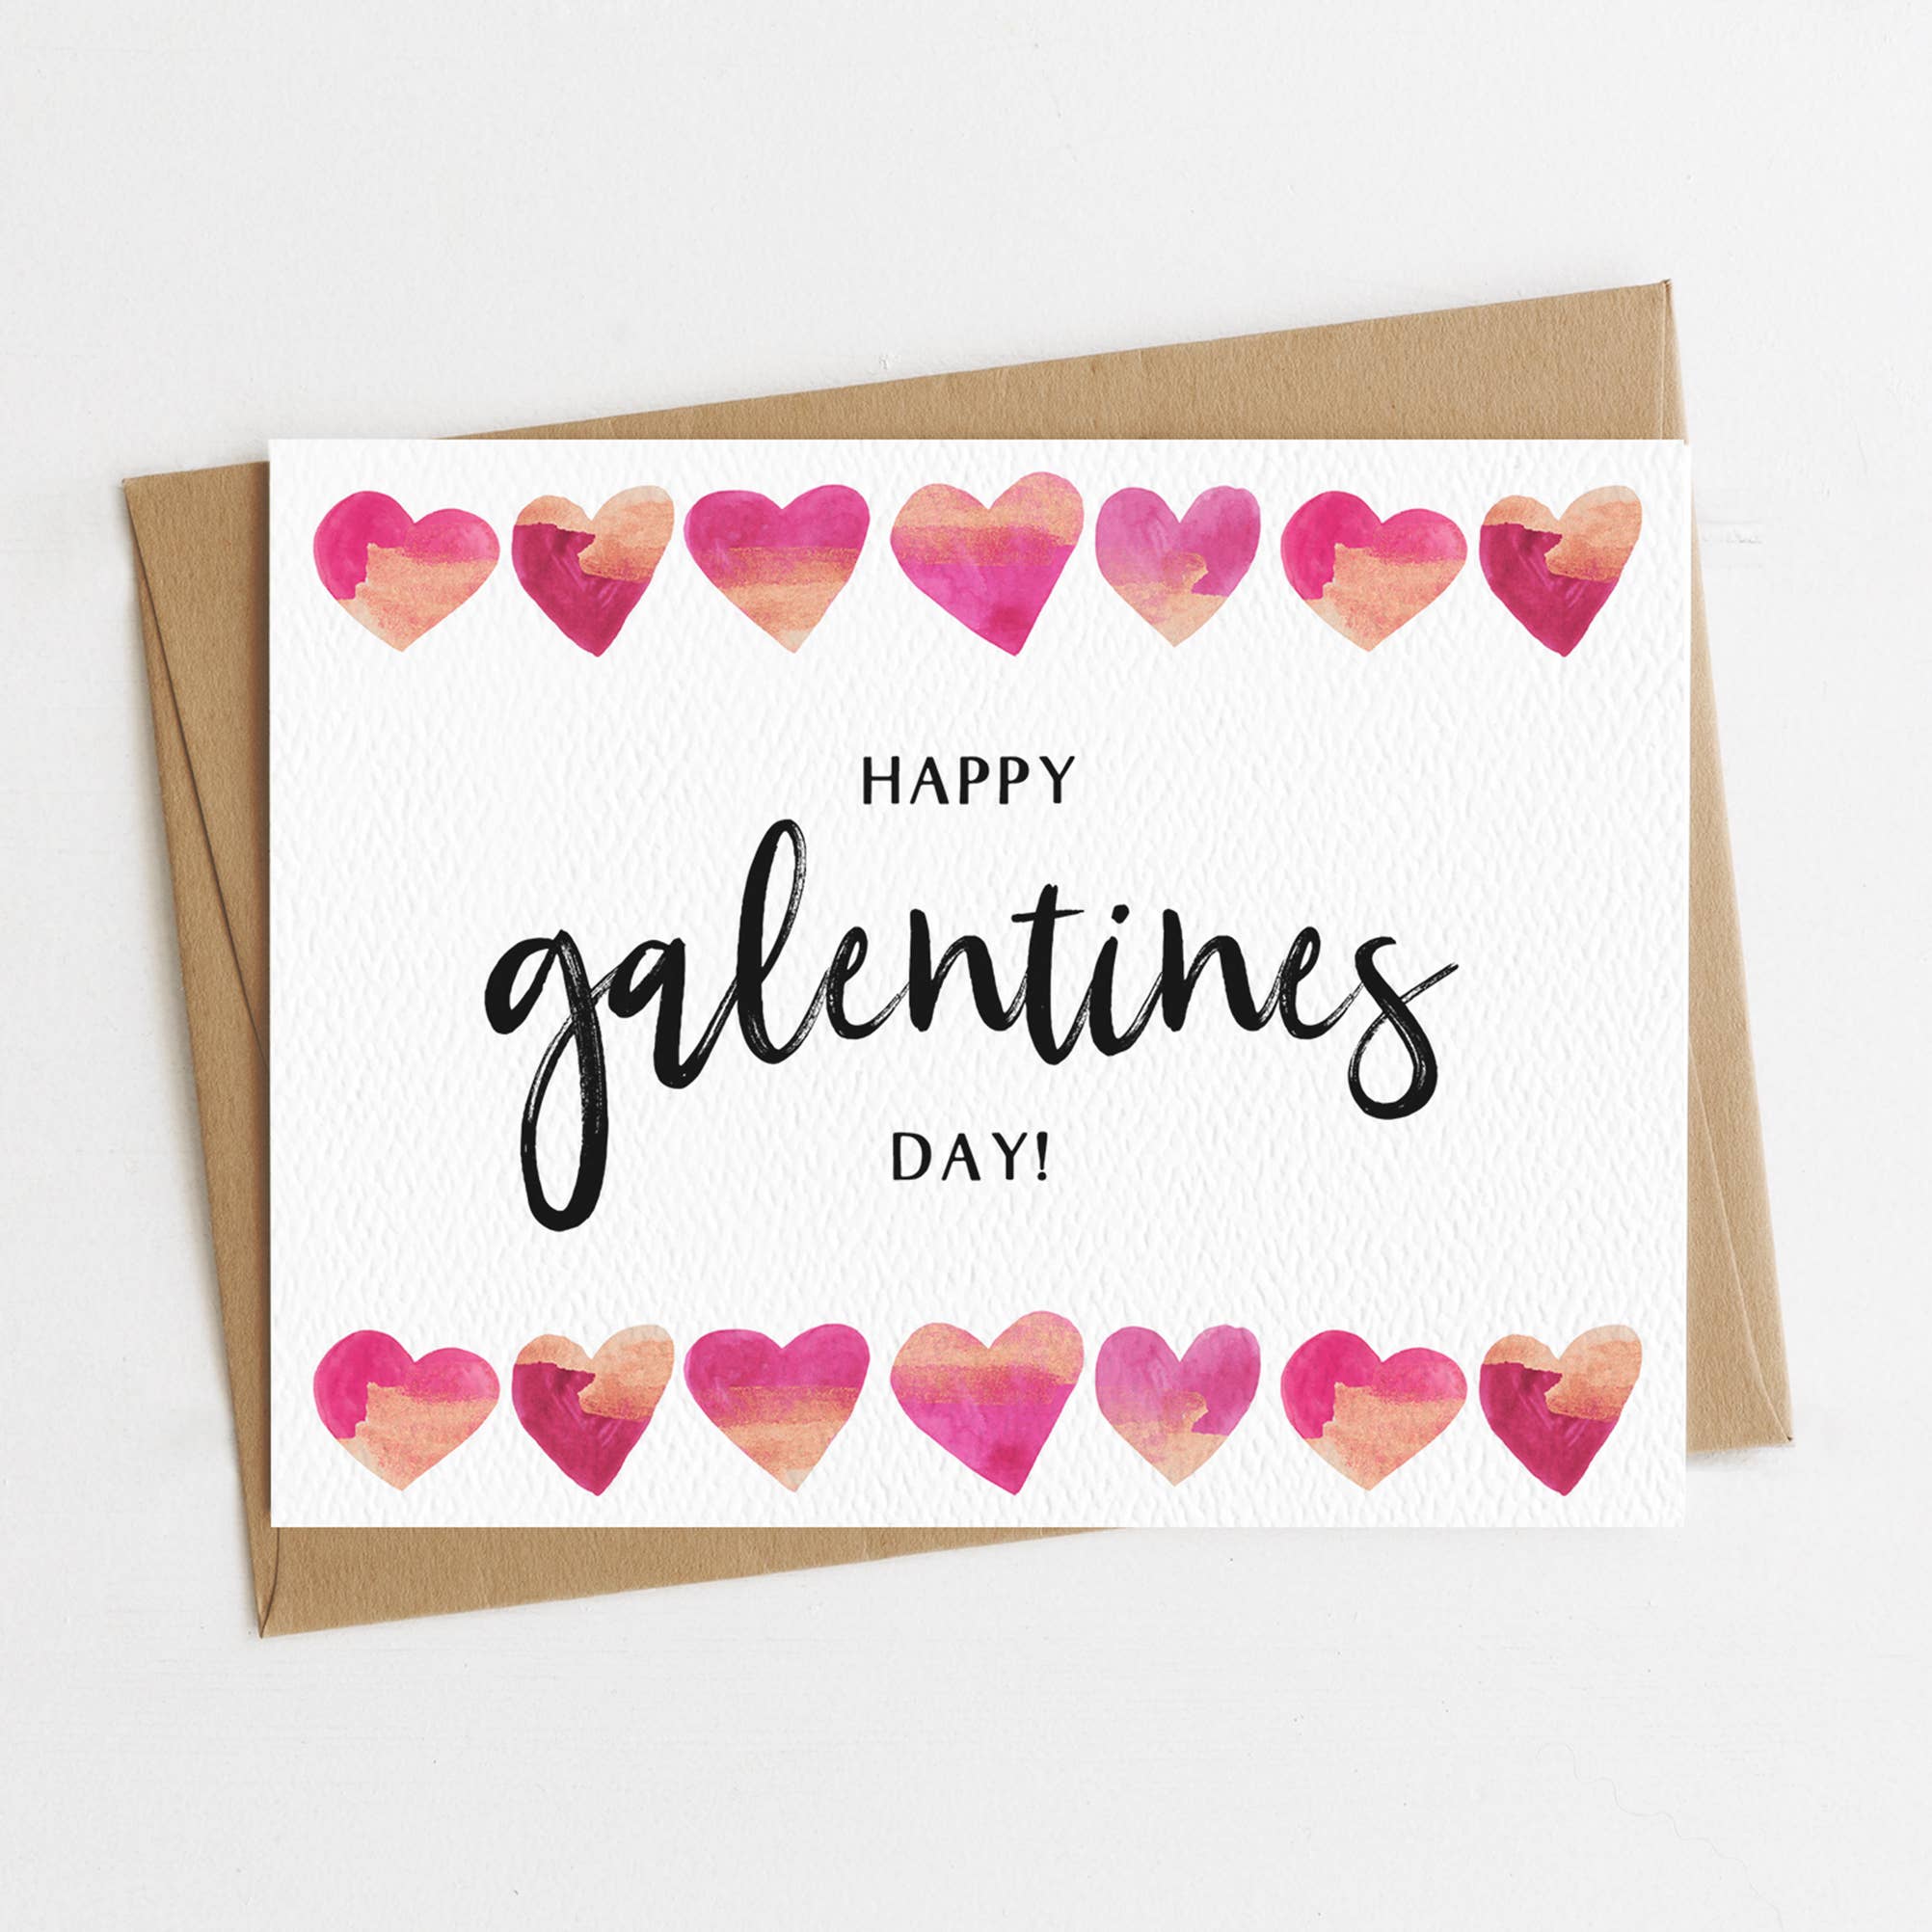 Happy Galentine's Day Card, Valentine's Day Card for Friends